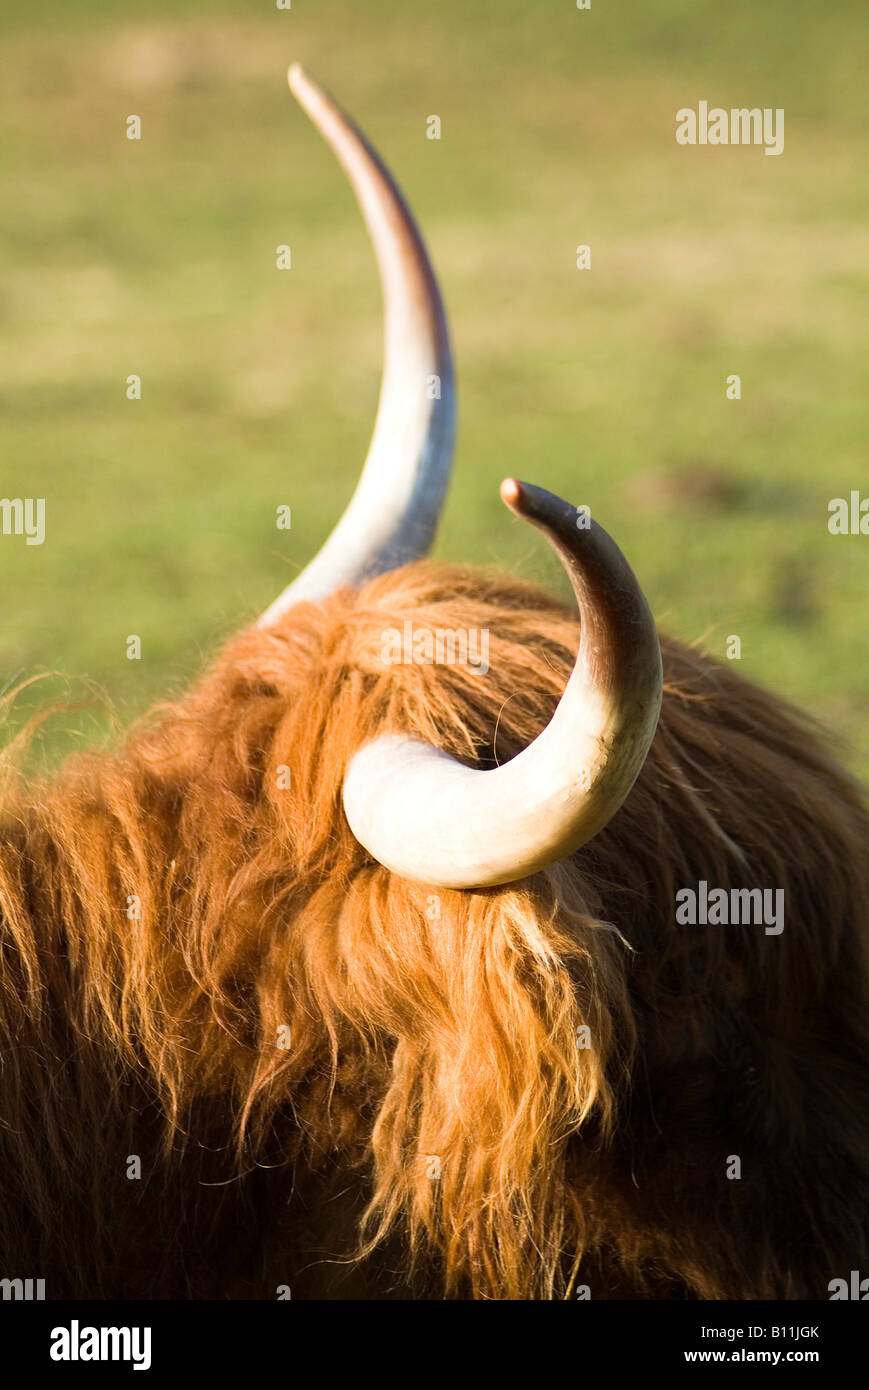 dh Highland Cow COW UK Shaggy haired Highland Cow Horns close up scottish Cows Head hair Cattle Animal Stockfoto